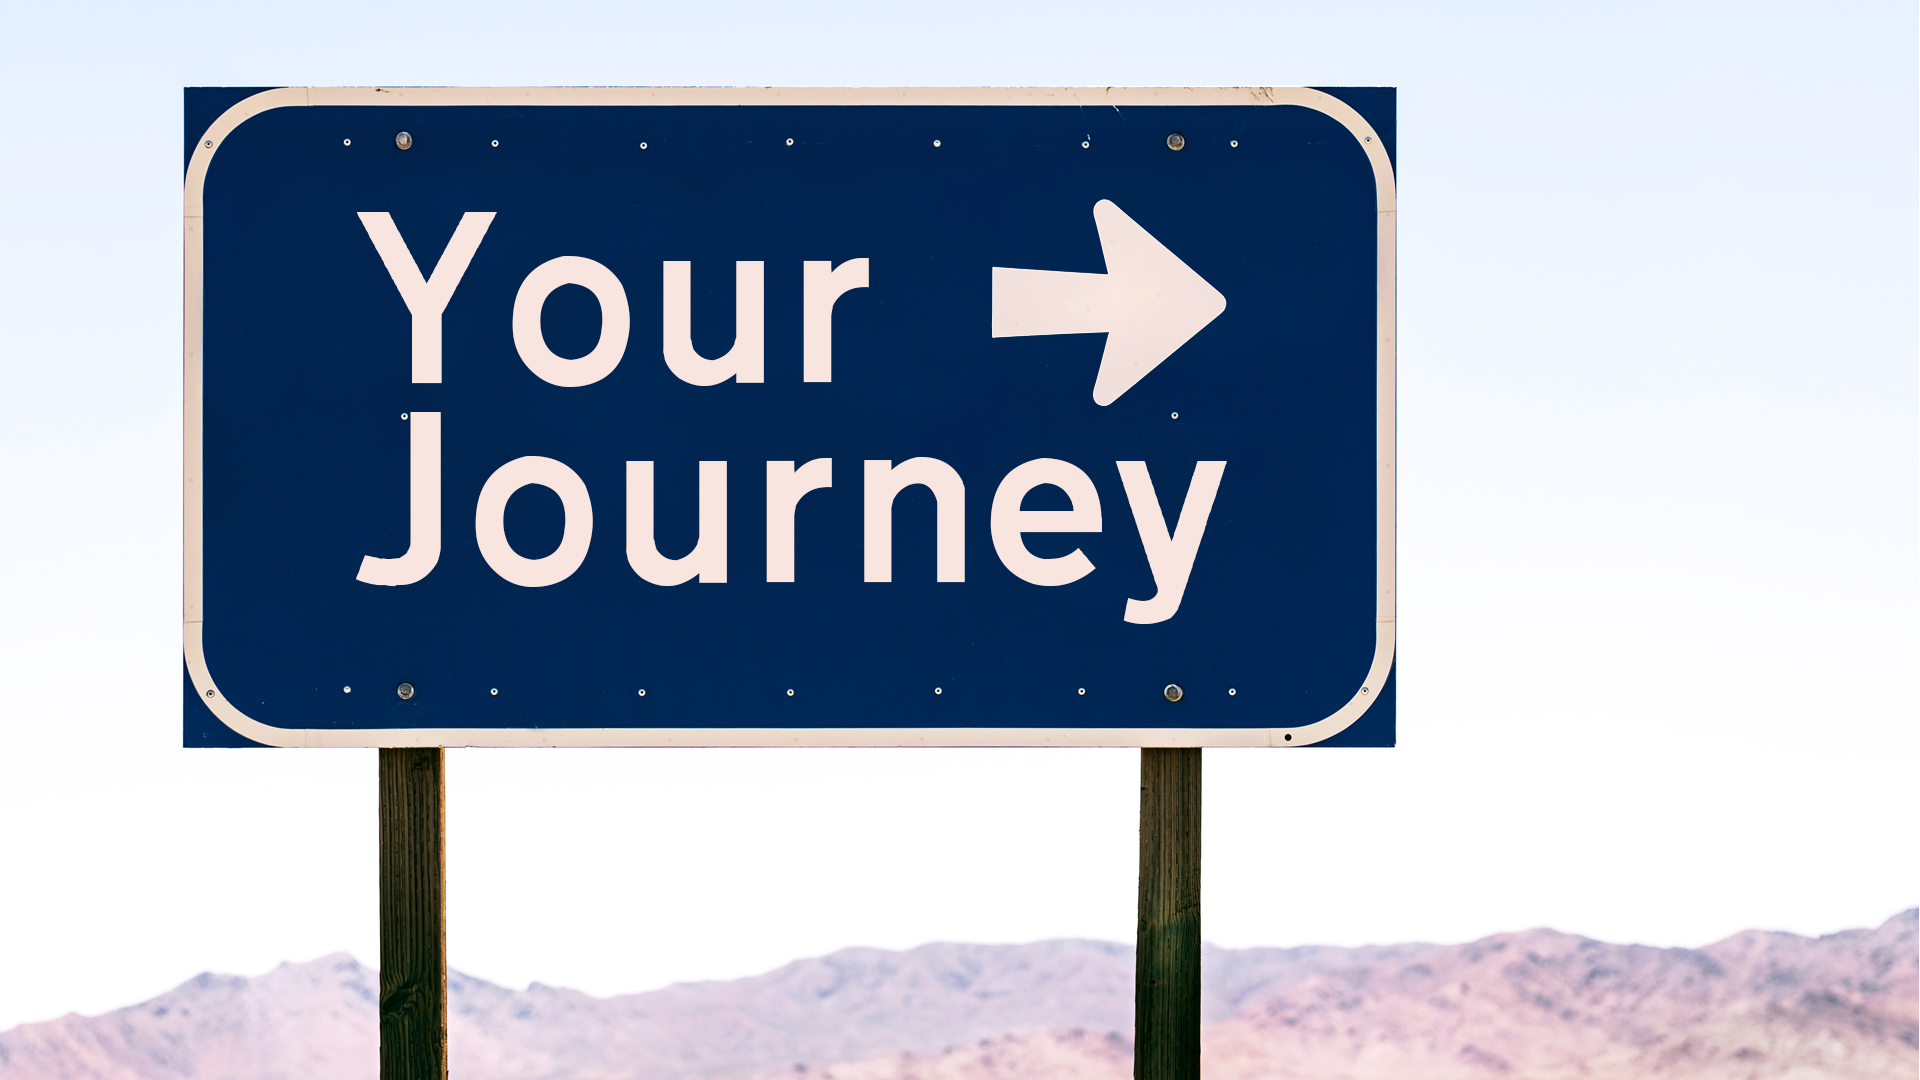 Your journey road sign